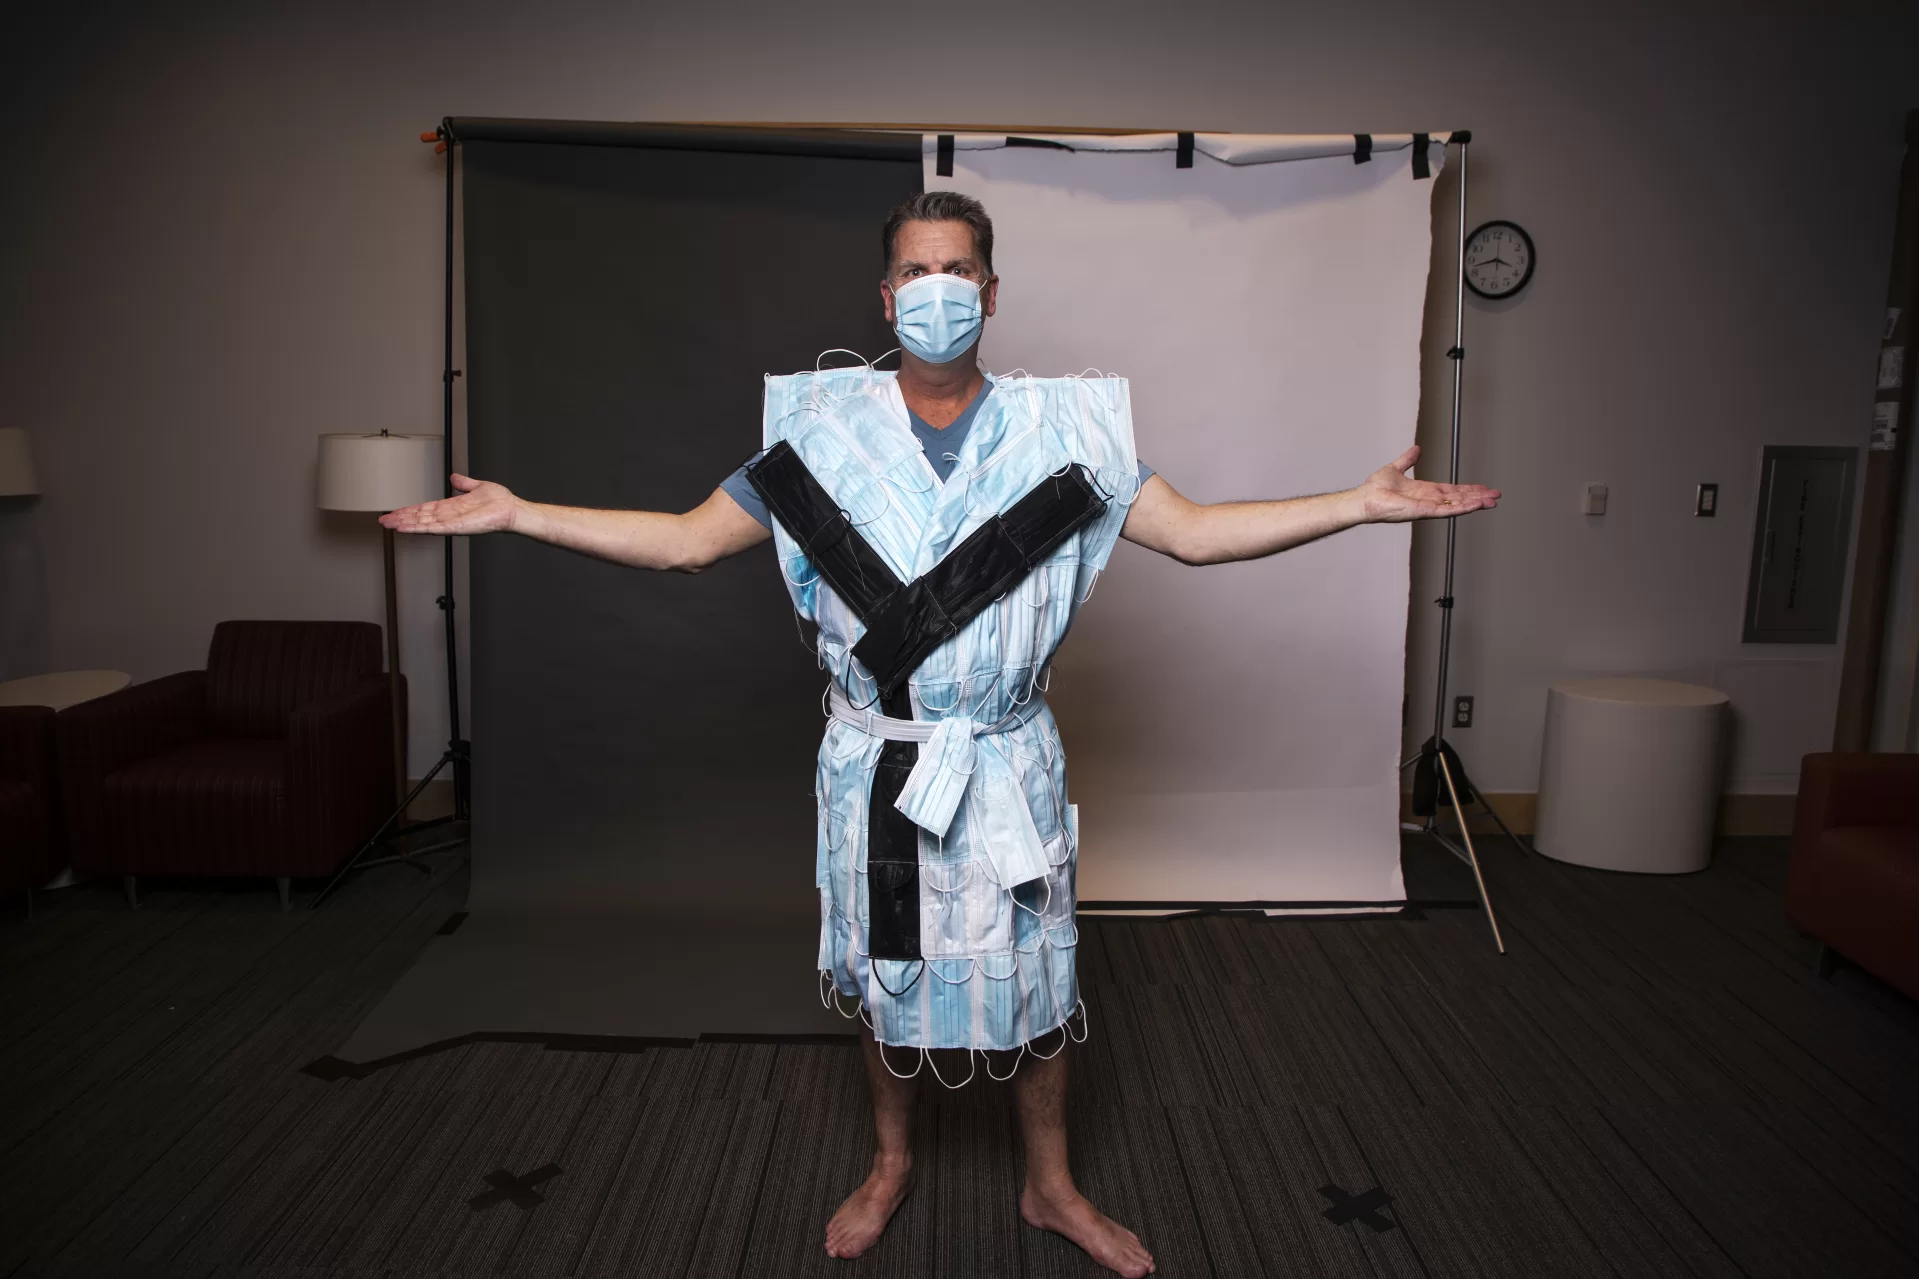 Kirk Read, Professor of French and Francophone Studies, poses for portraits dressed in attire created for this years Trashion Show on November 12, 2021.